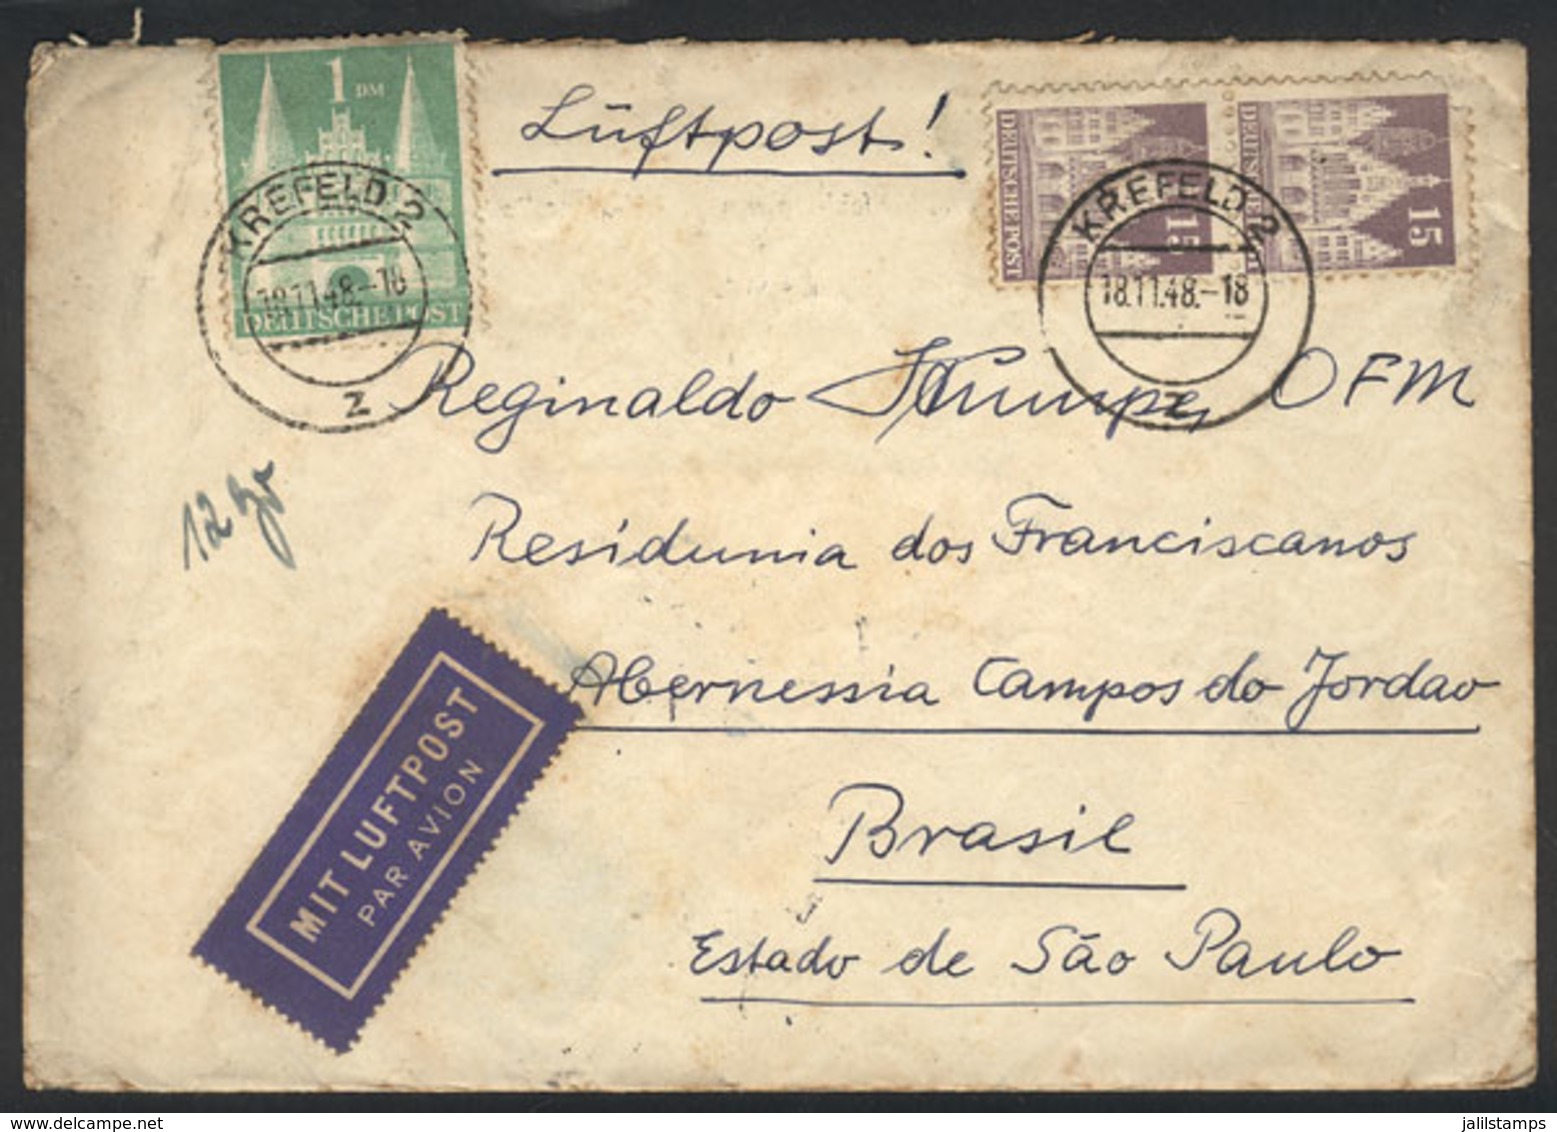 GERMANY: Airmail Cover Sent From Krefeld To Brazil On 18/NO/1948 Franked With 1.30Dm., Interesting! - Prefilatelia